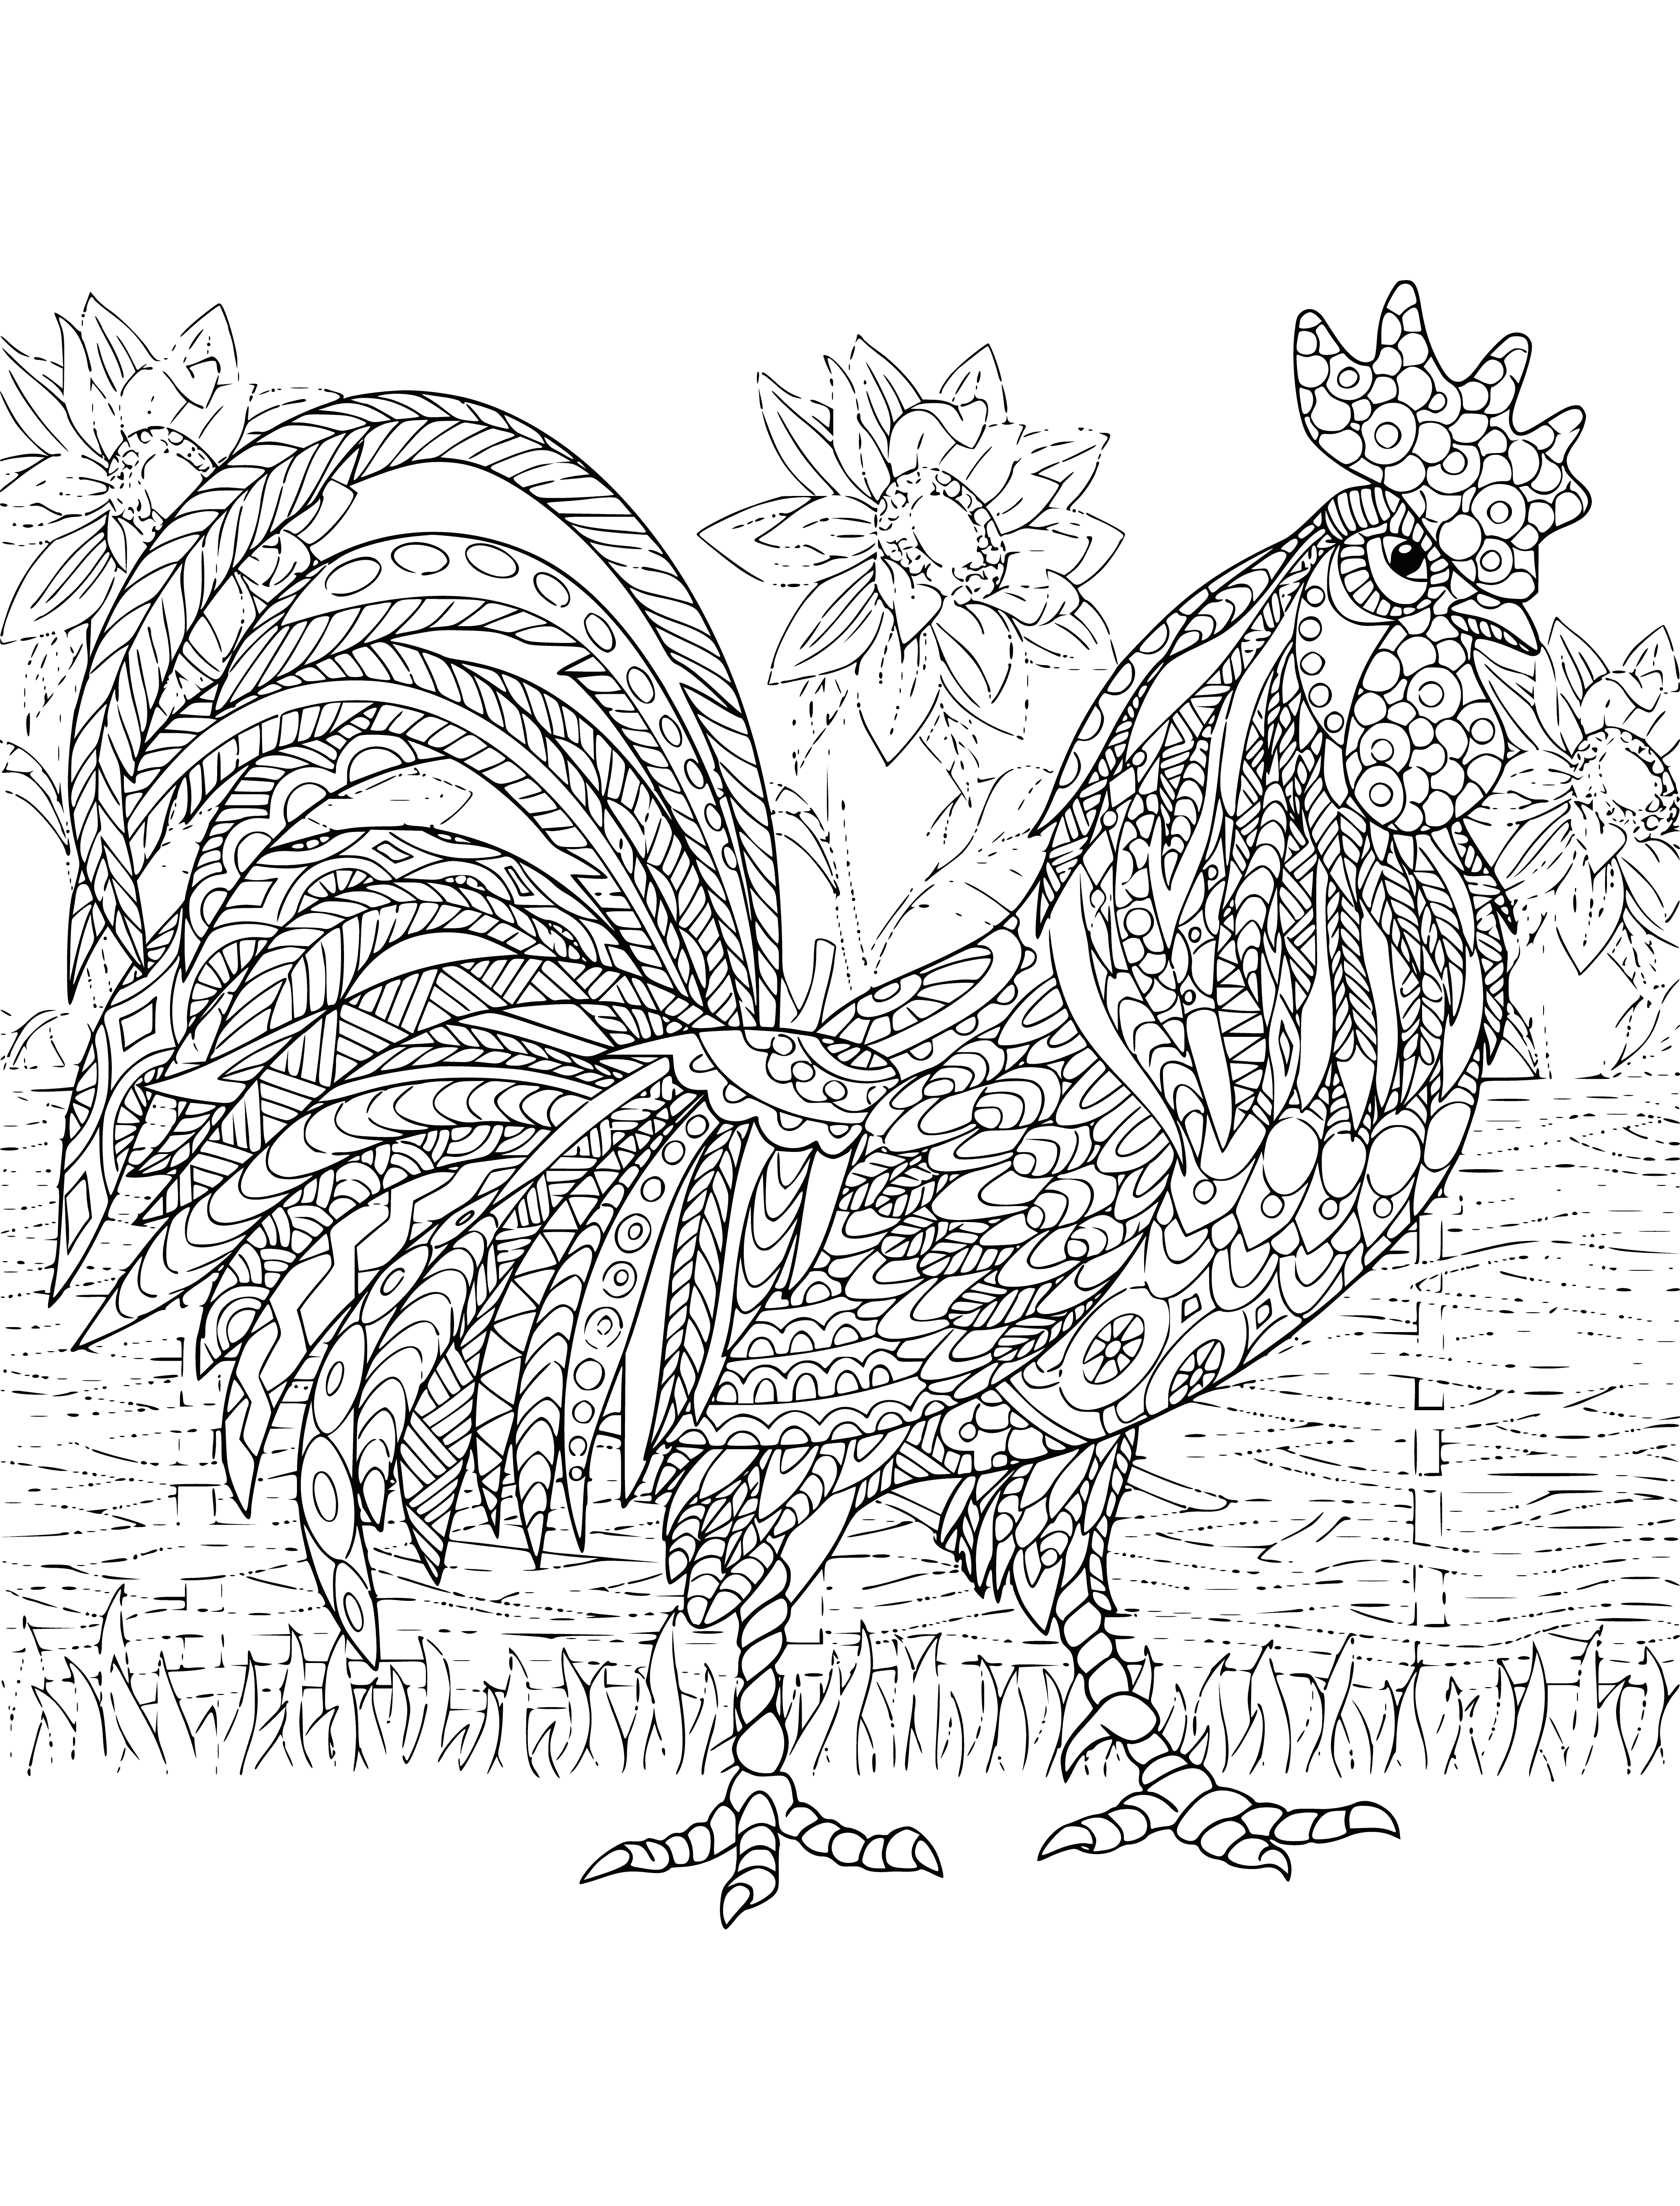 coloring page: Rooster standing atop wattle fence, long tail feathers pointing back, head tilted down, open beak & closed eyes.